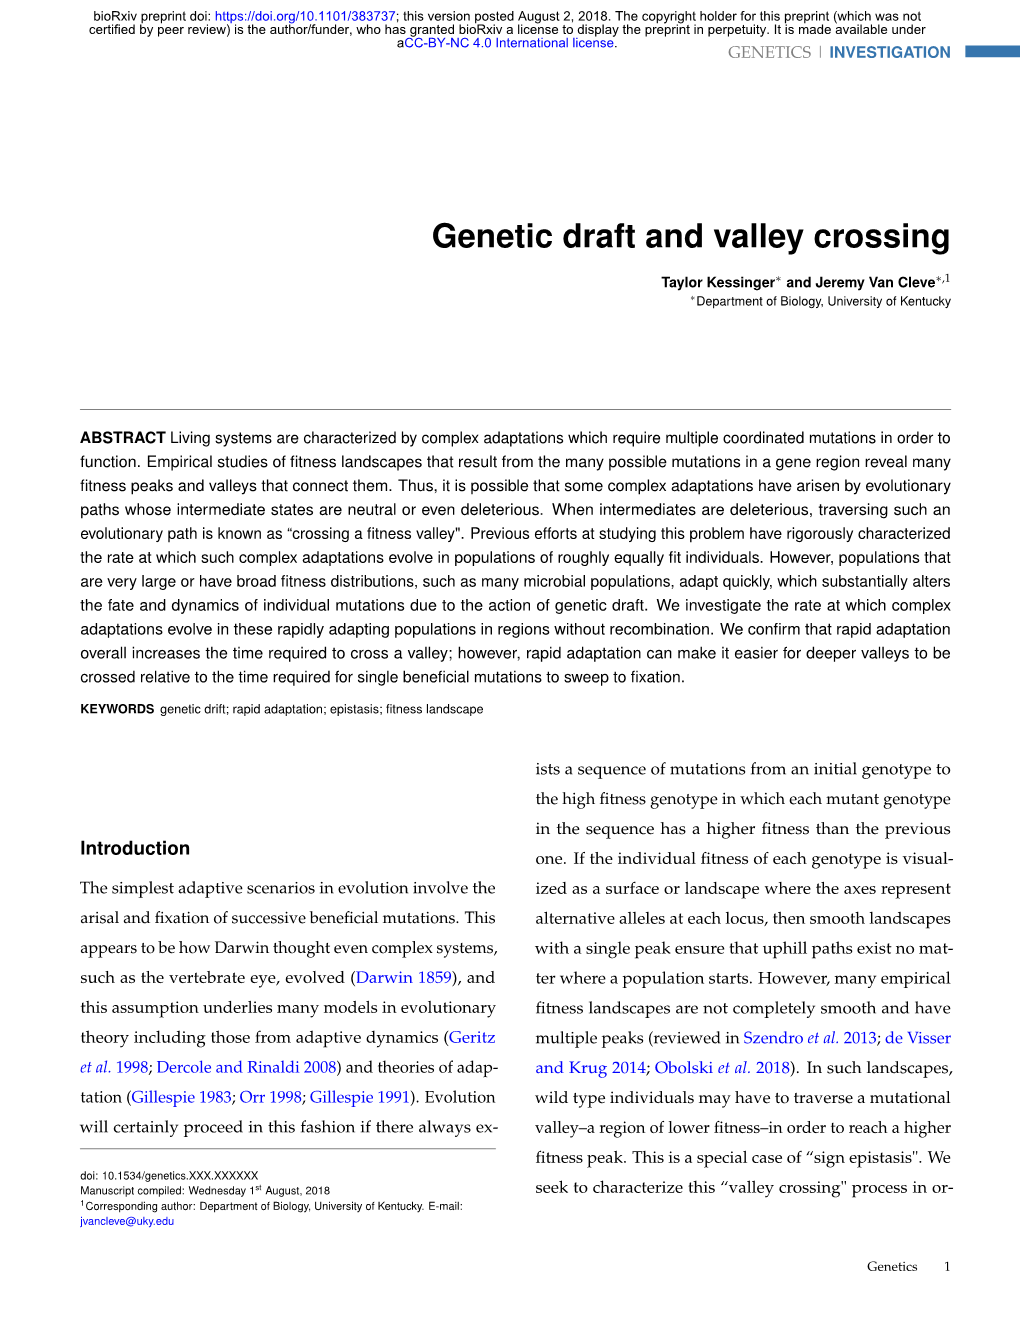 Genetic Draft and Valley Crossing